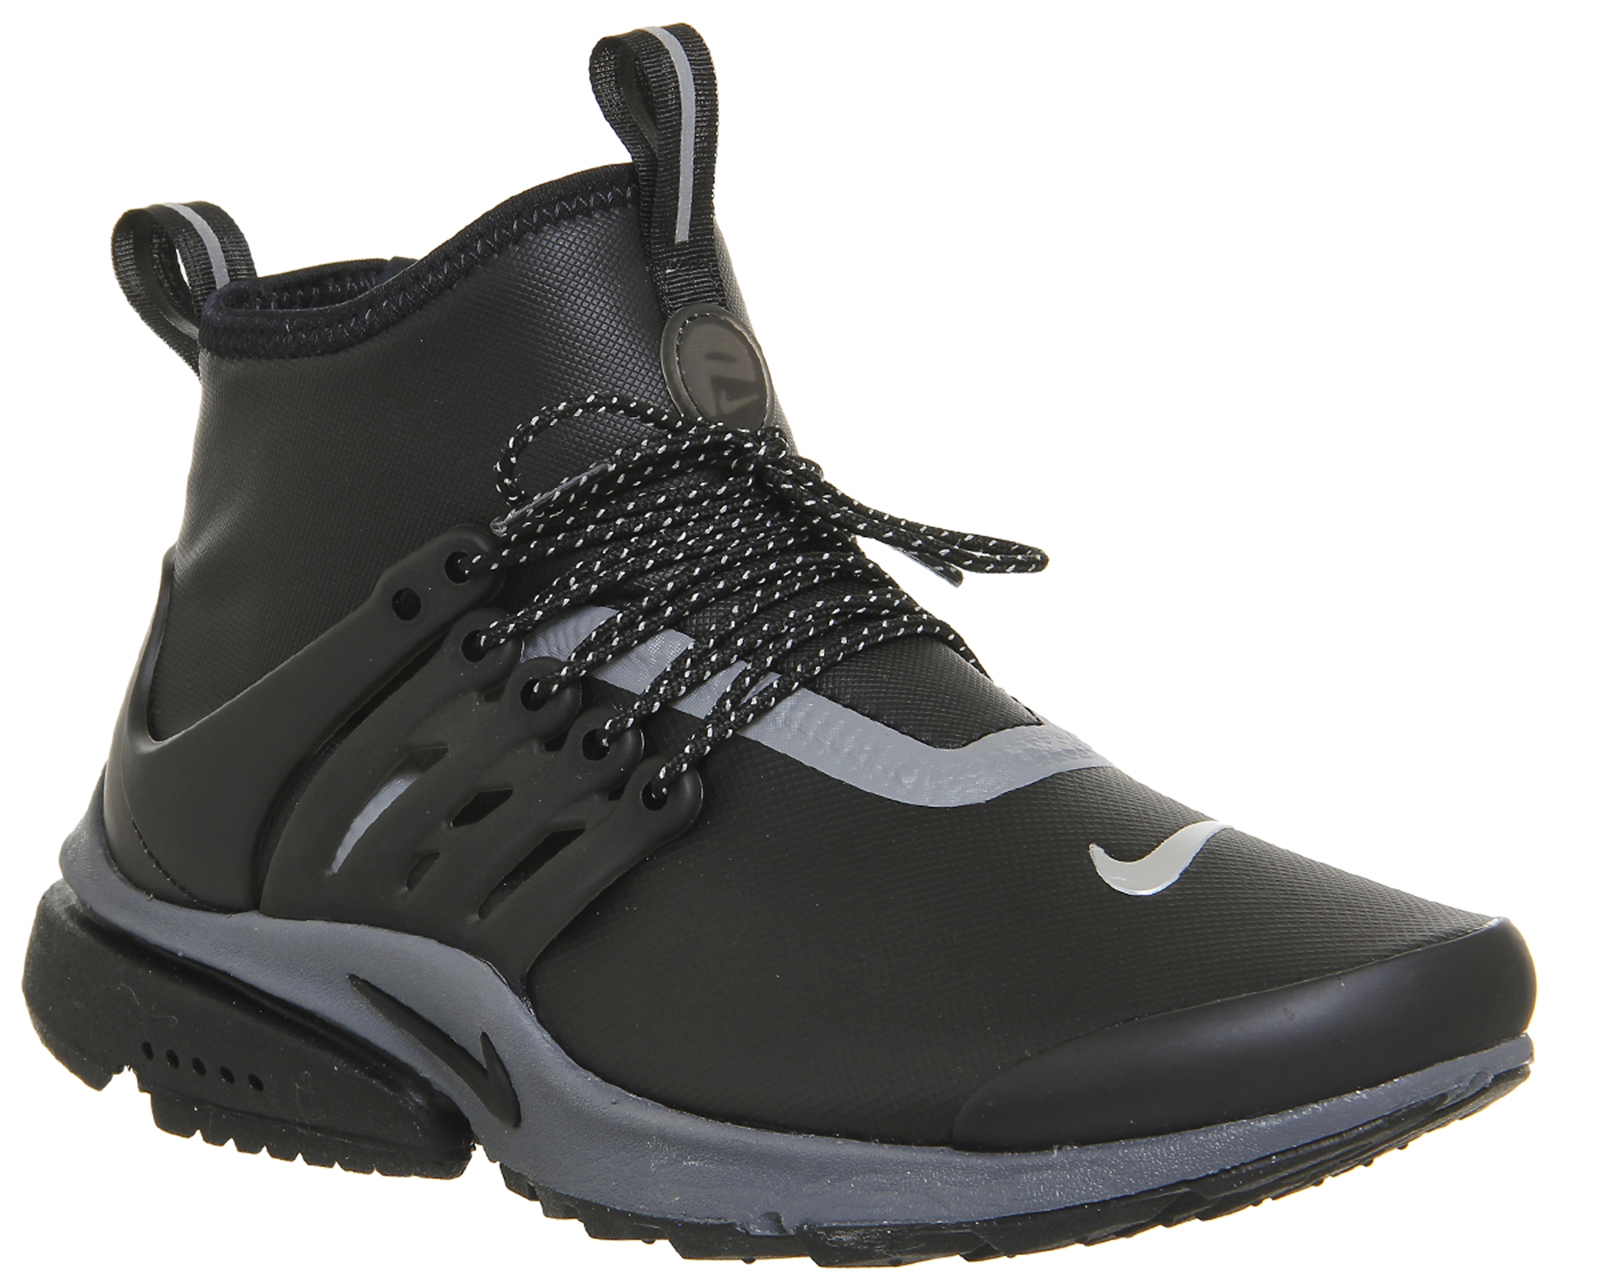 Nike Air Presto Mid Utility Wmns Black Black Reflect Silver - Hers trainers